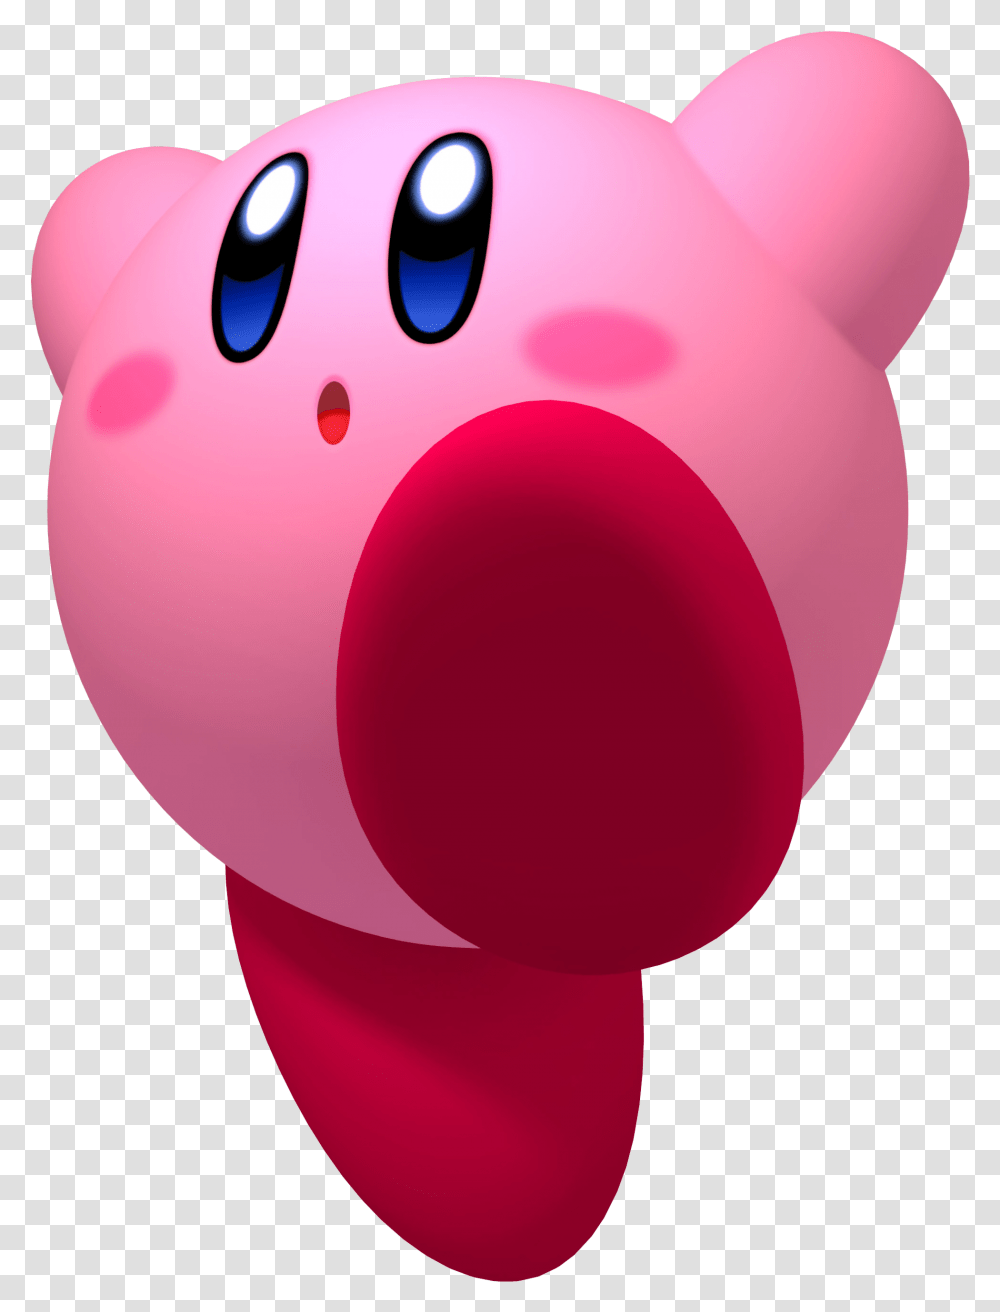 Kirby S Return To Dream Land Kirby S Dream Land Kirby Kirby, Balloon, Bowling, Sport, Sports Transparent Png